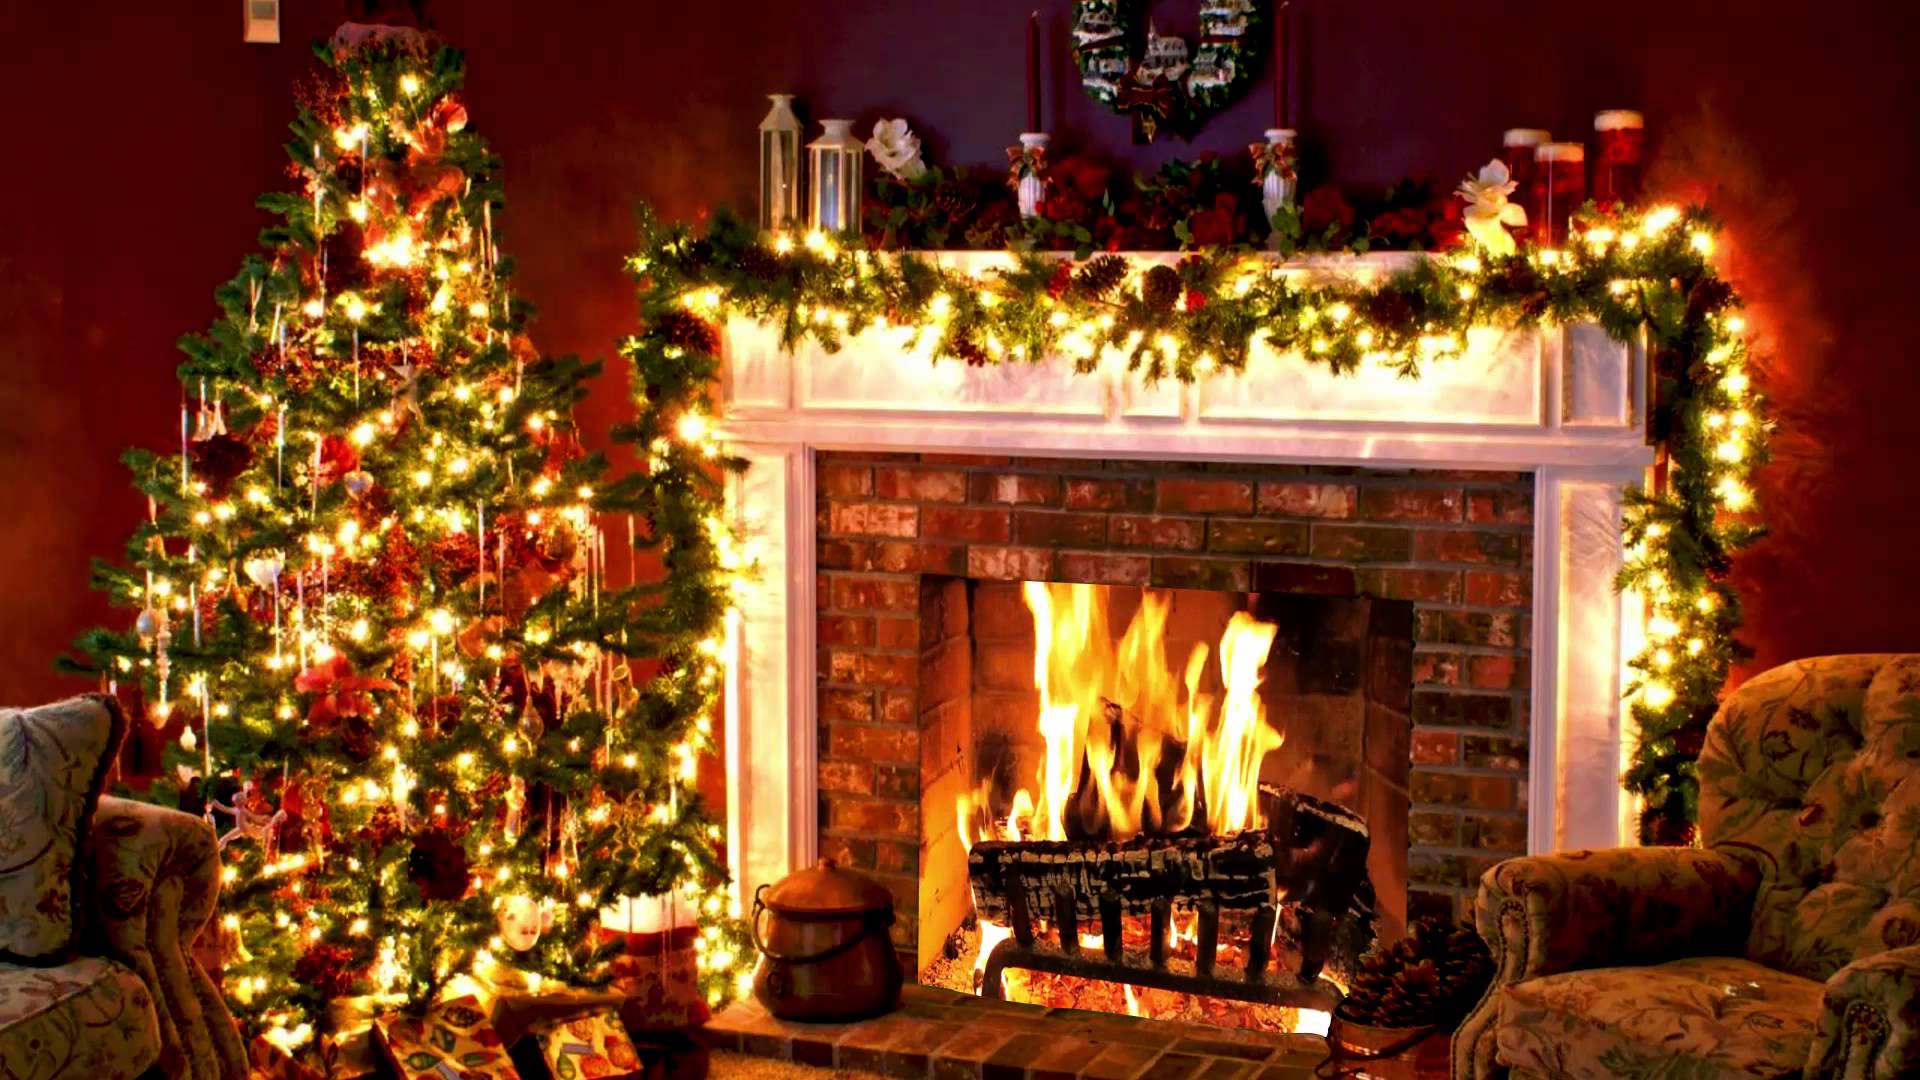 4K Holiday Fireplace Scene  8 Hour Christmas Video Screensaver by Nature  Relaxation  YouTube